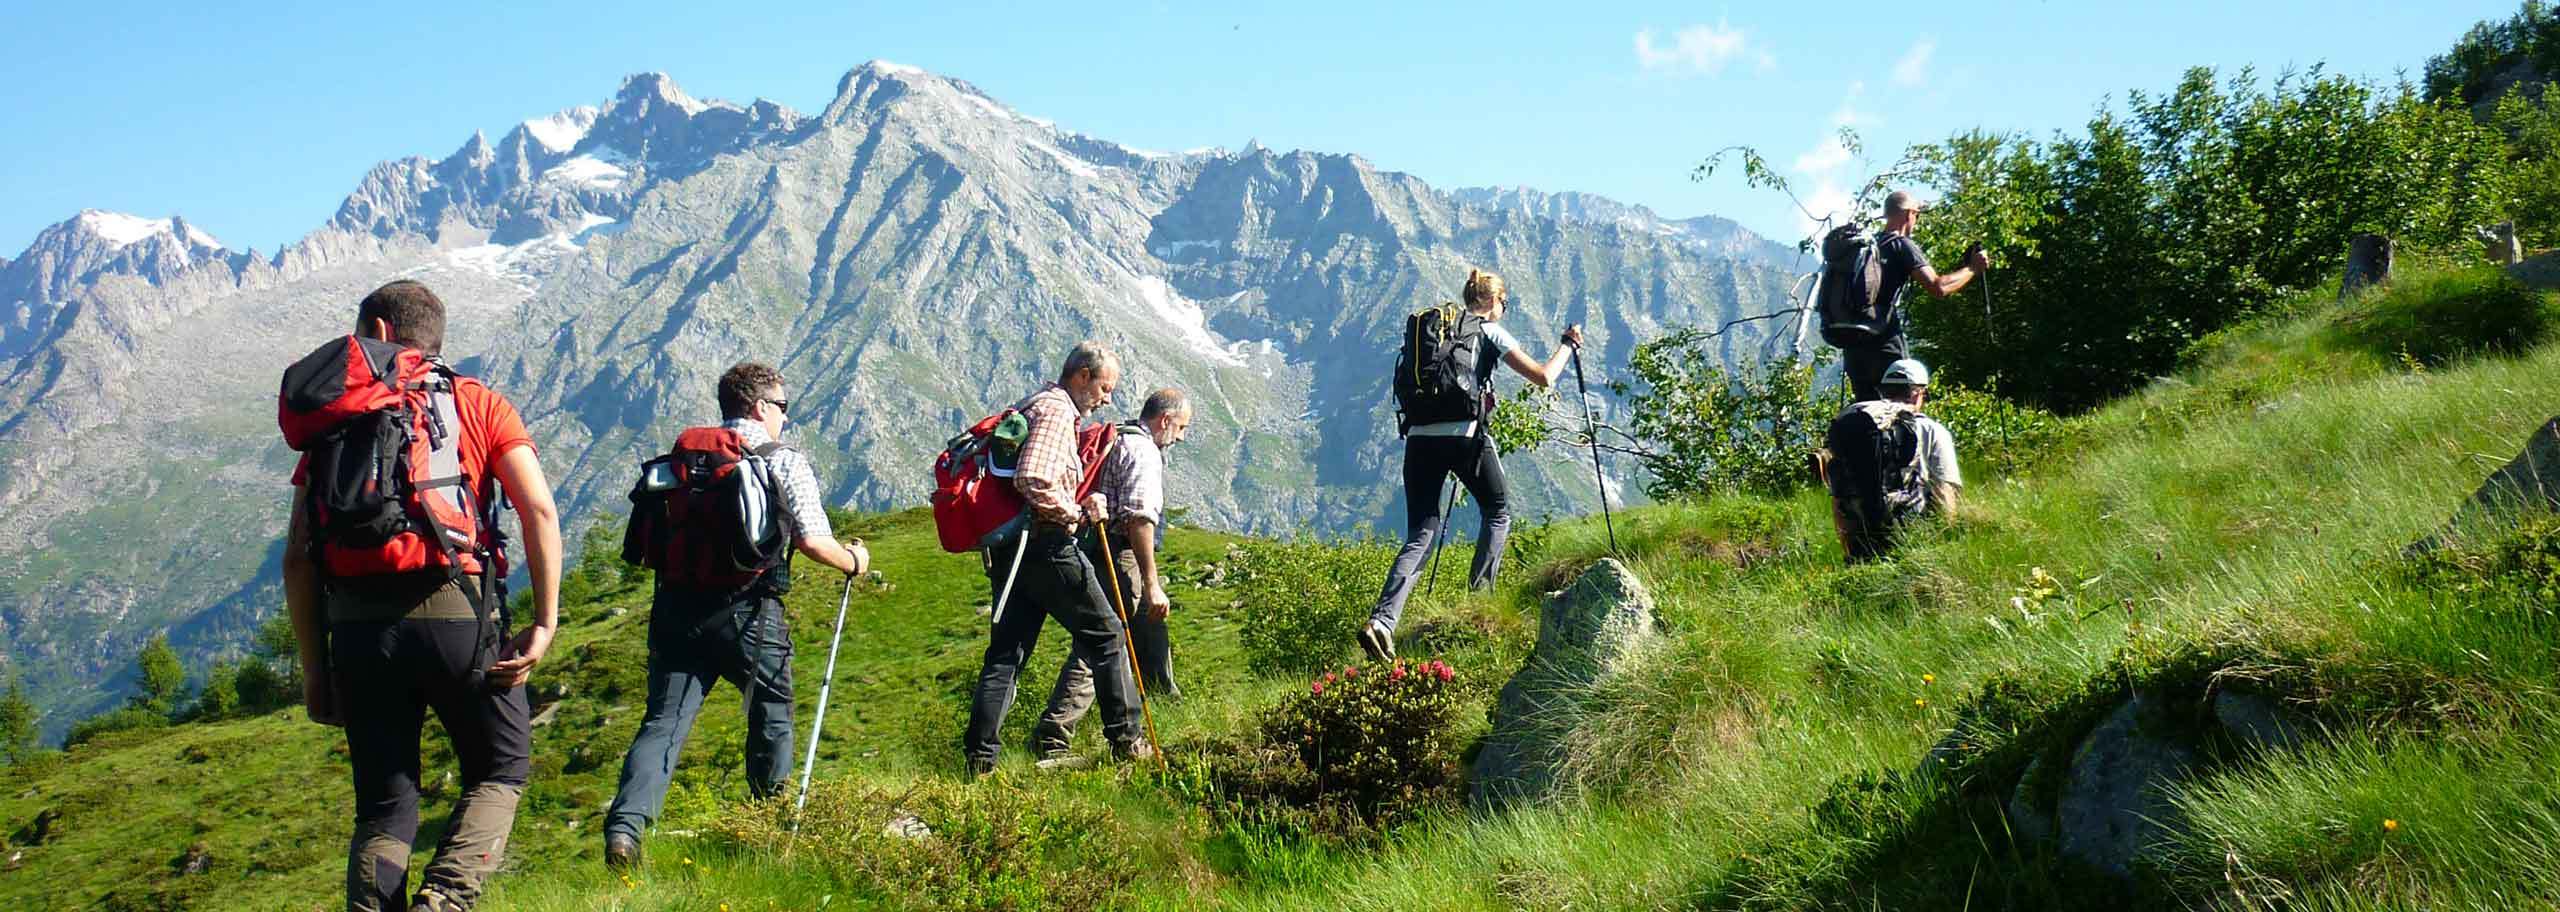 Hiking in Valchiavenna, Trekking with a Mountain Guide